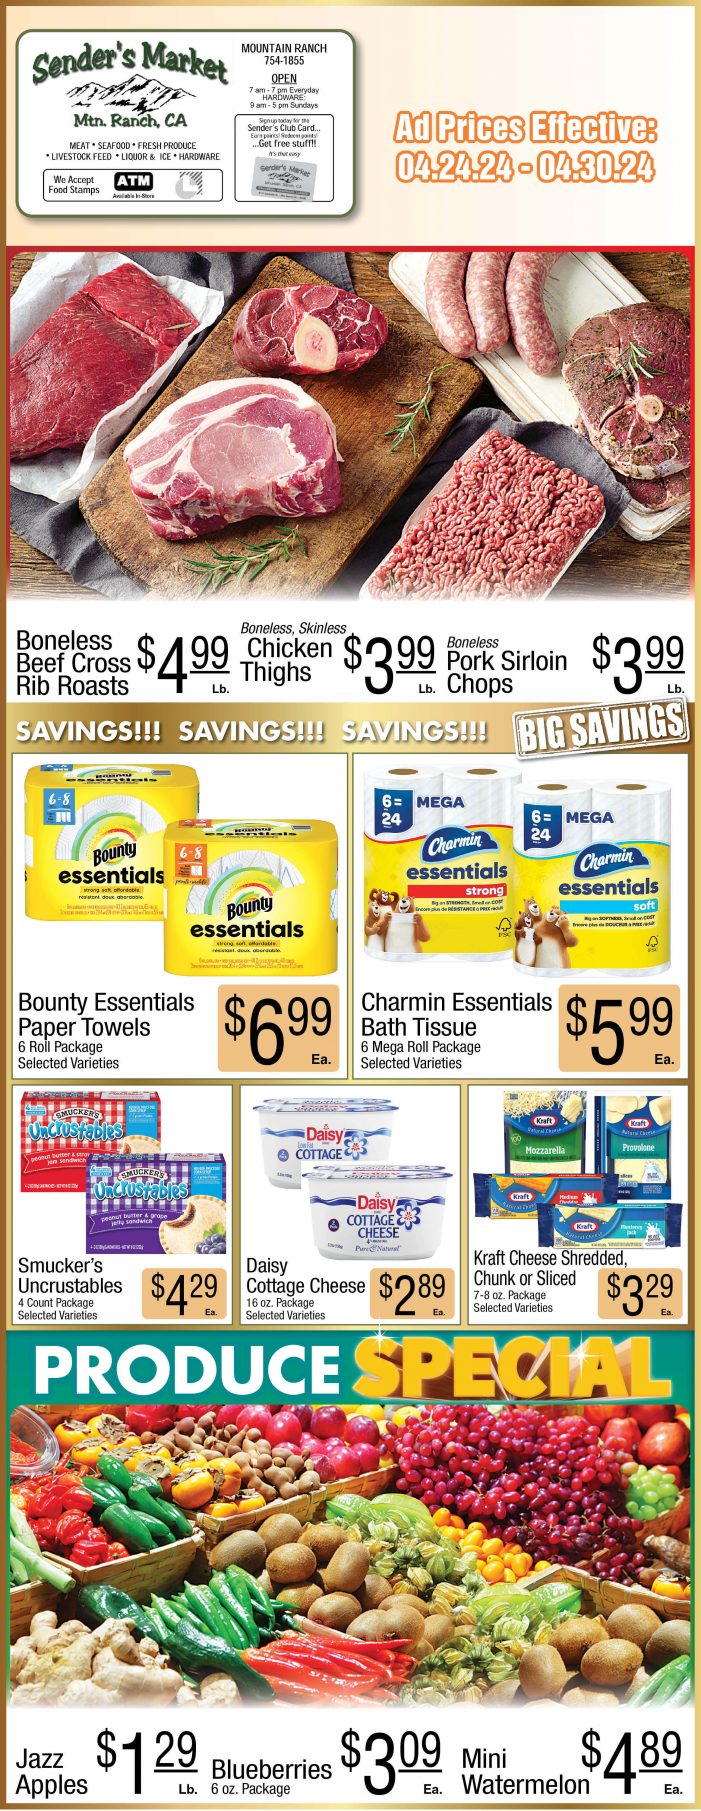 Sender’s Market Weekly Ad & Grocery Specials Through April 30th! Shop Local & Save!!